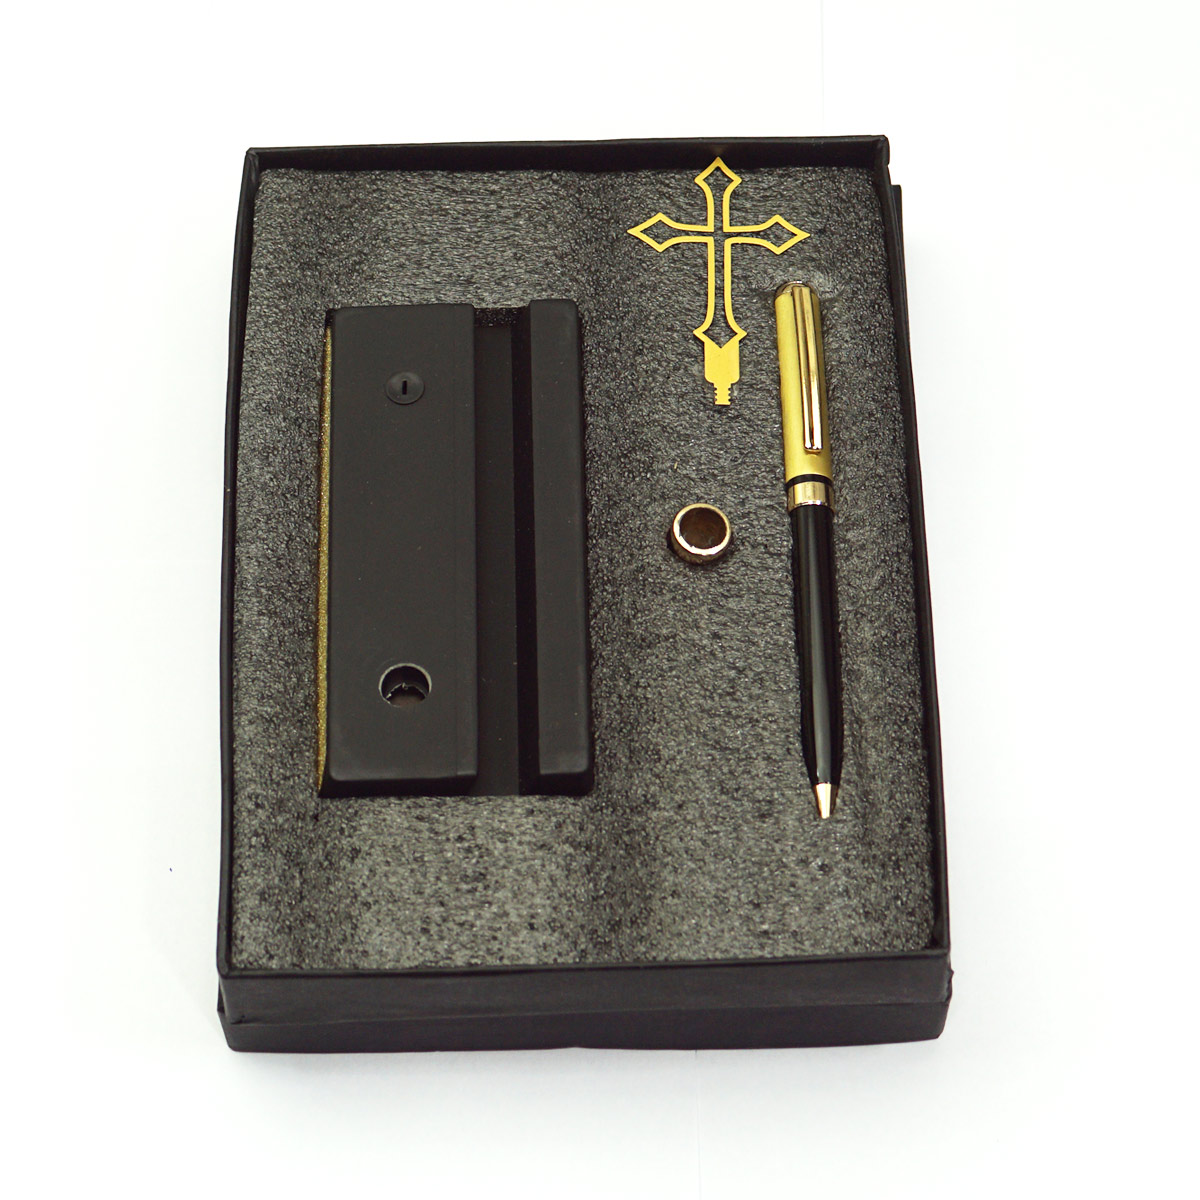 penhouse.in Jesus Design Stand With Ball Pen Holder And Mobile Stand With Fine Tip Twist Ball Pen Set SKU 23177